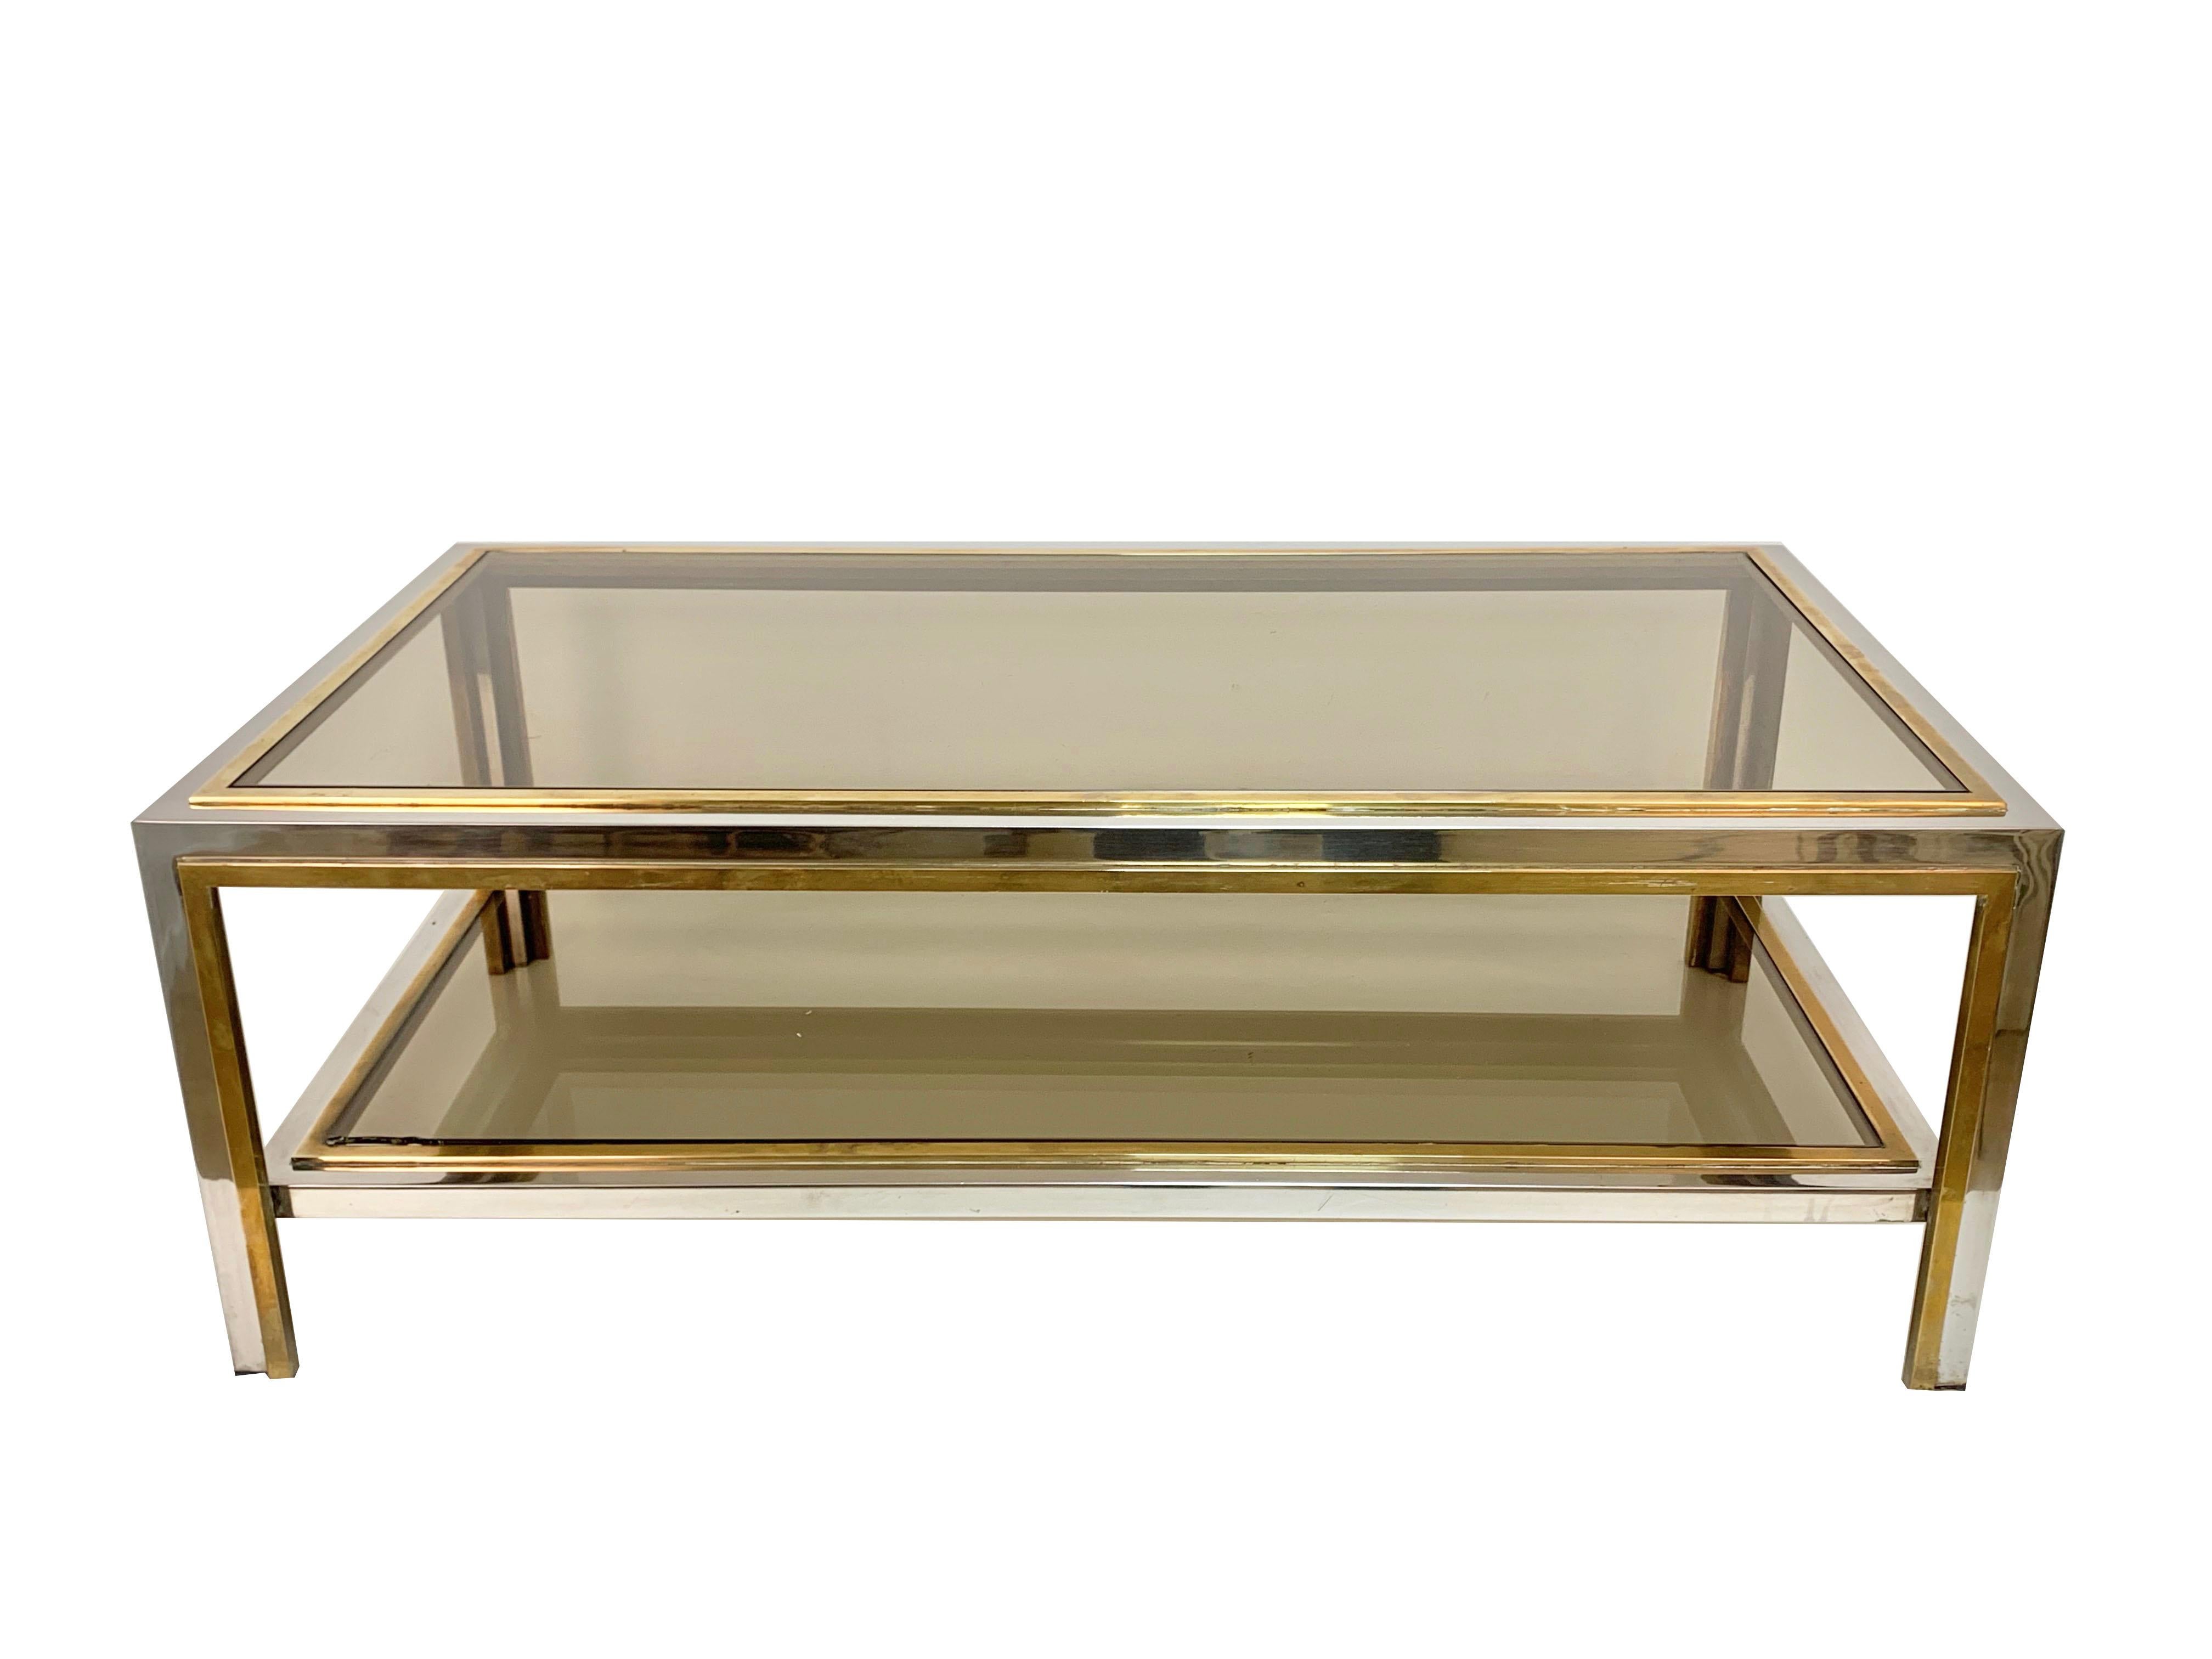 Elegant coffee table in chromed metal and brass, smoked glass adds to the seductive elegance of this midcentury piece.
Two levels
Measurements: 110 x 60 H 40 cm.